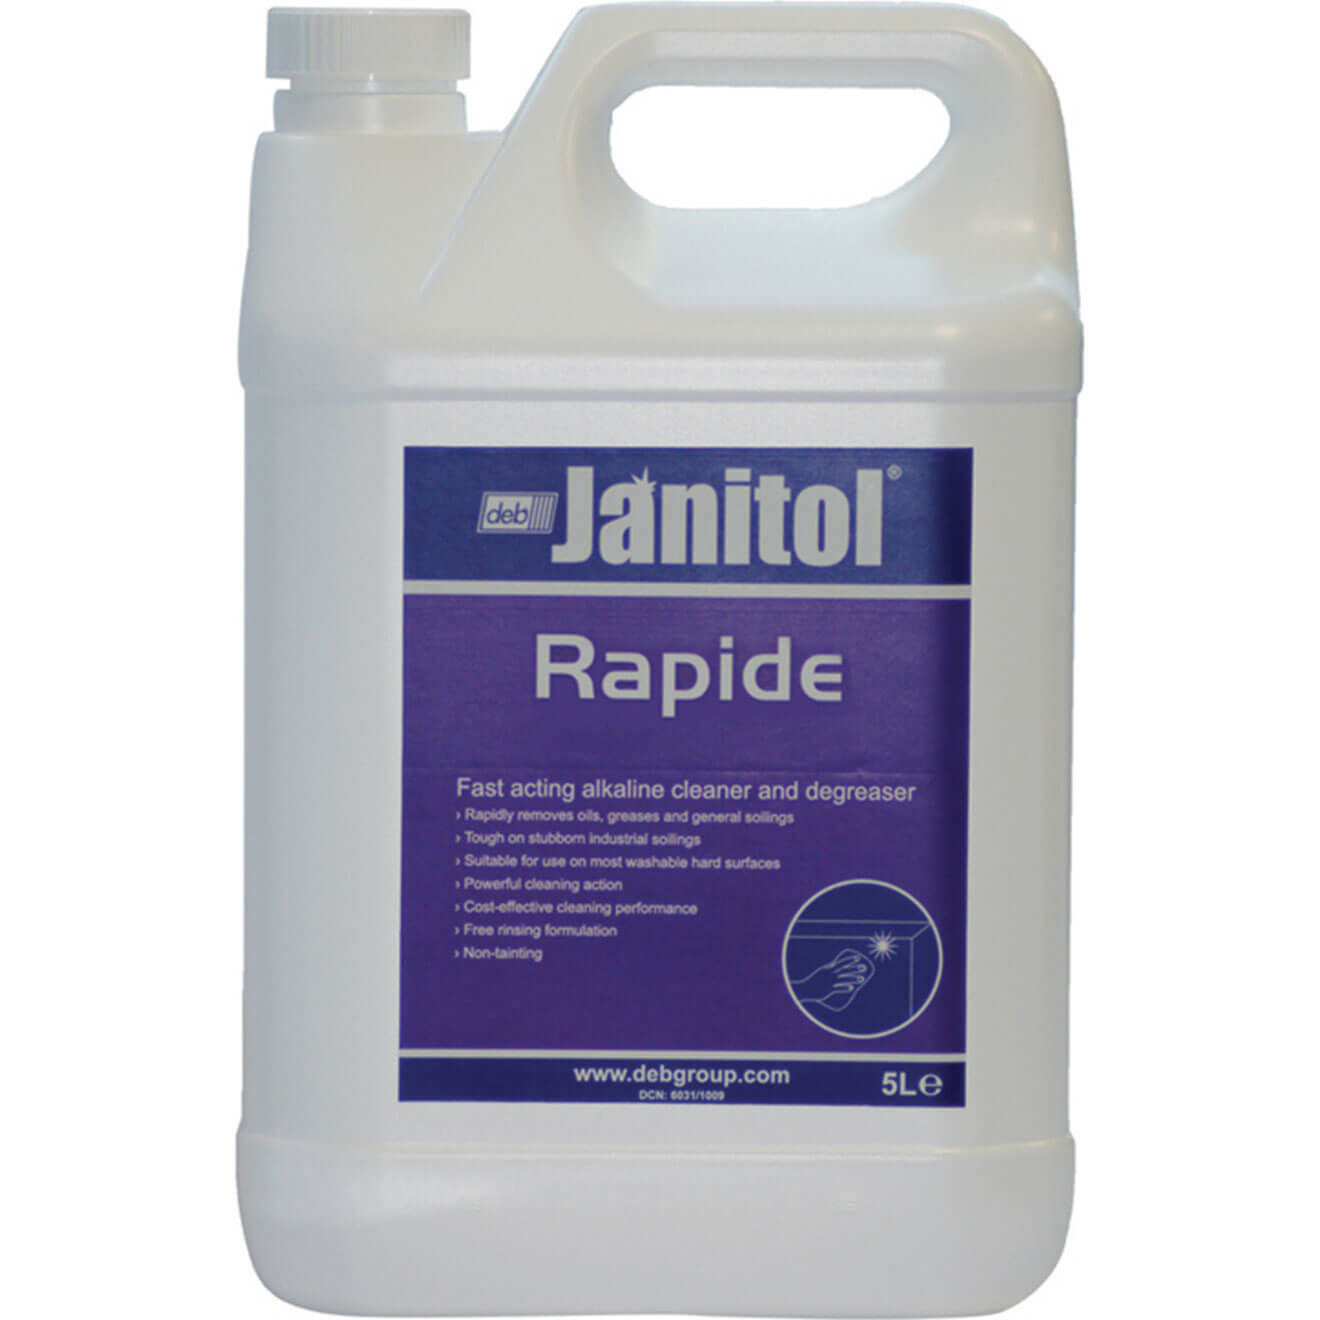 Image of Swarfega Janitol Rapide Cleaner and Degreaser 5l